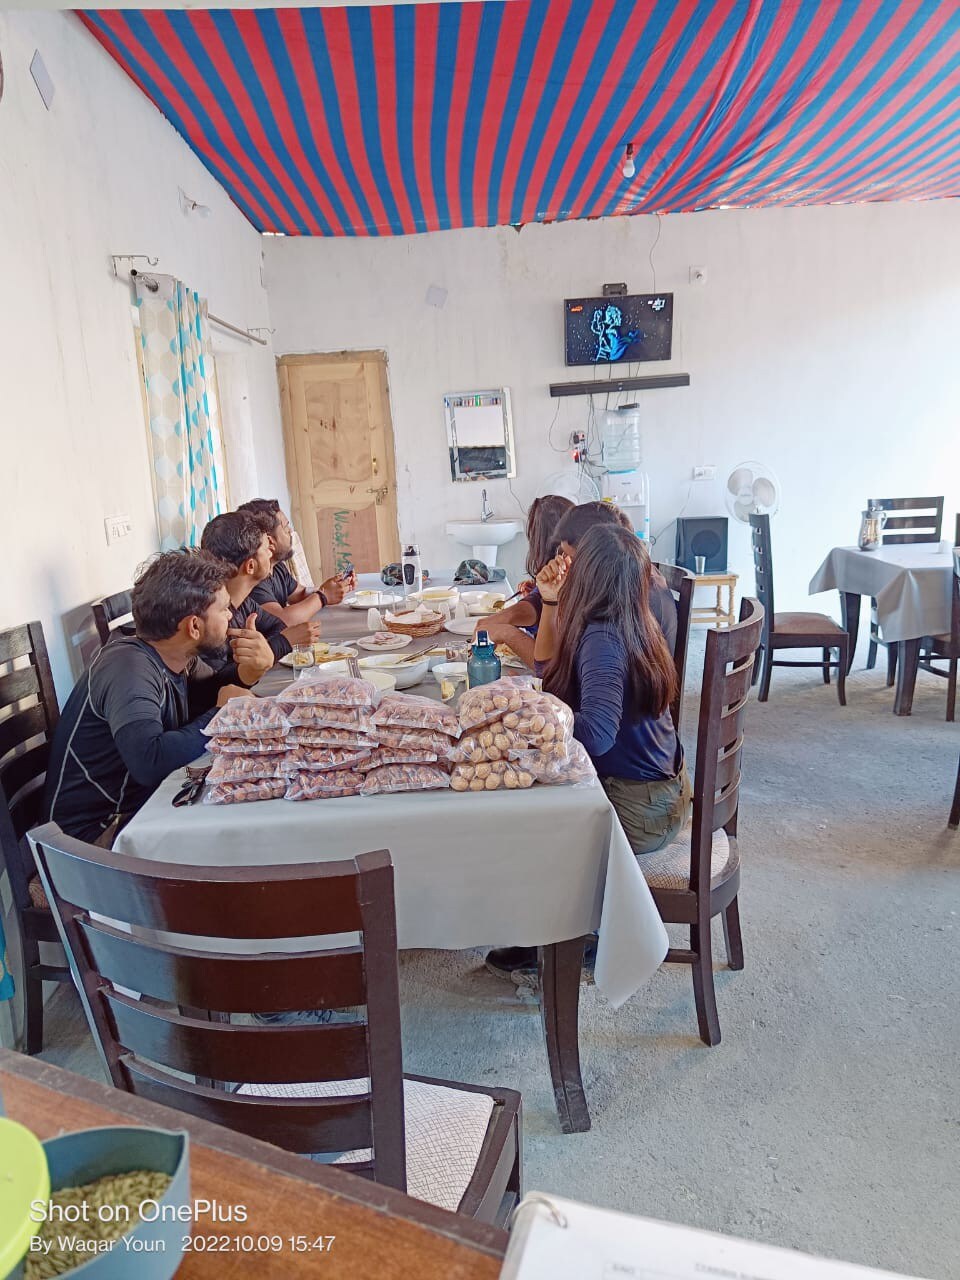 Tyakshi Summer Camp and Cafe